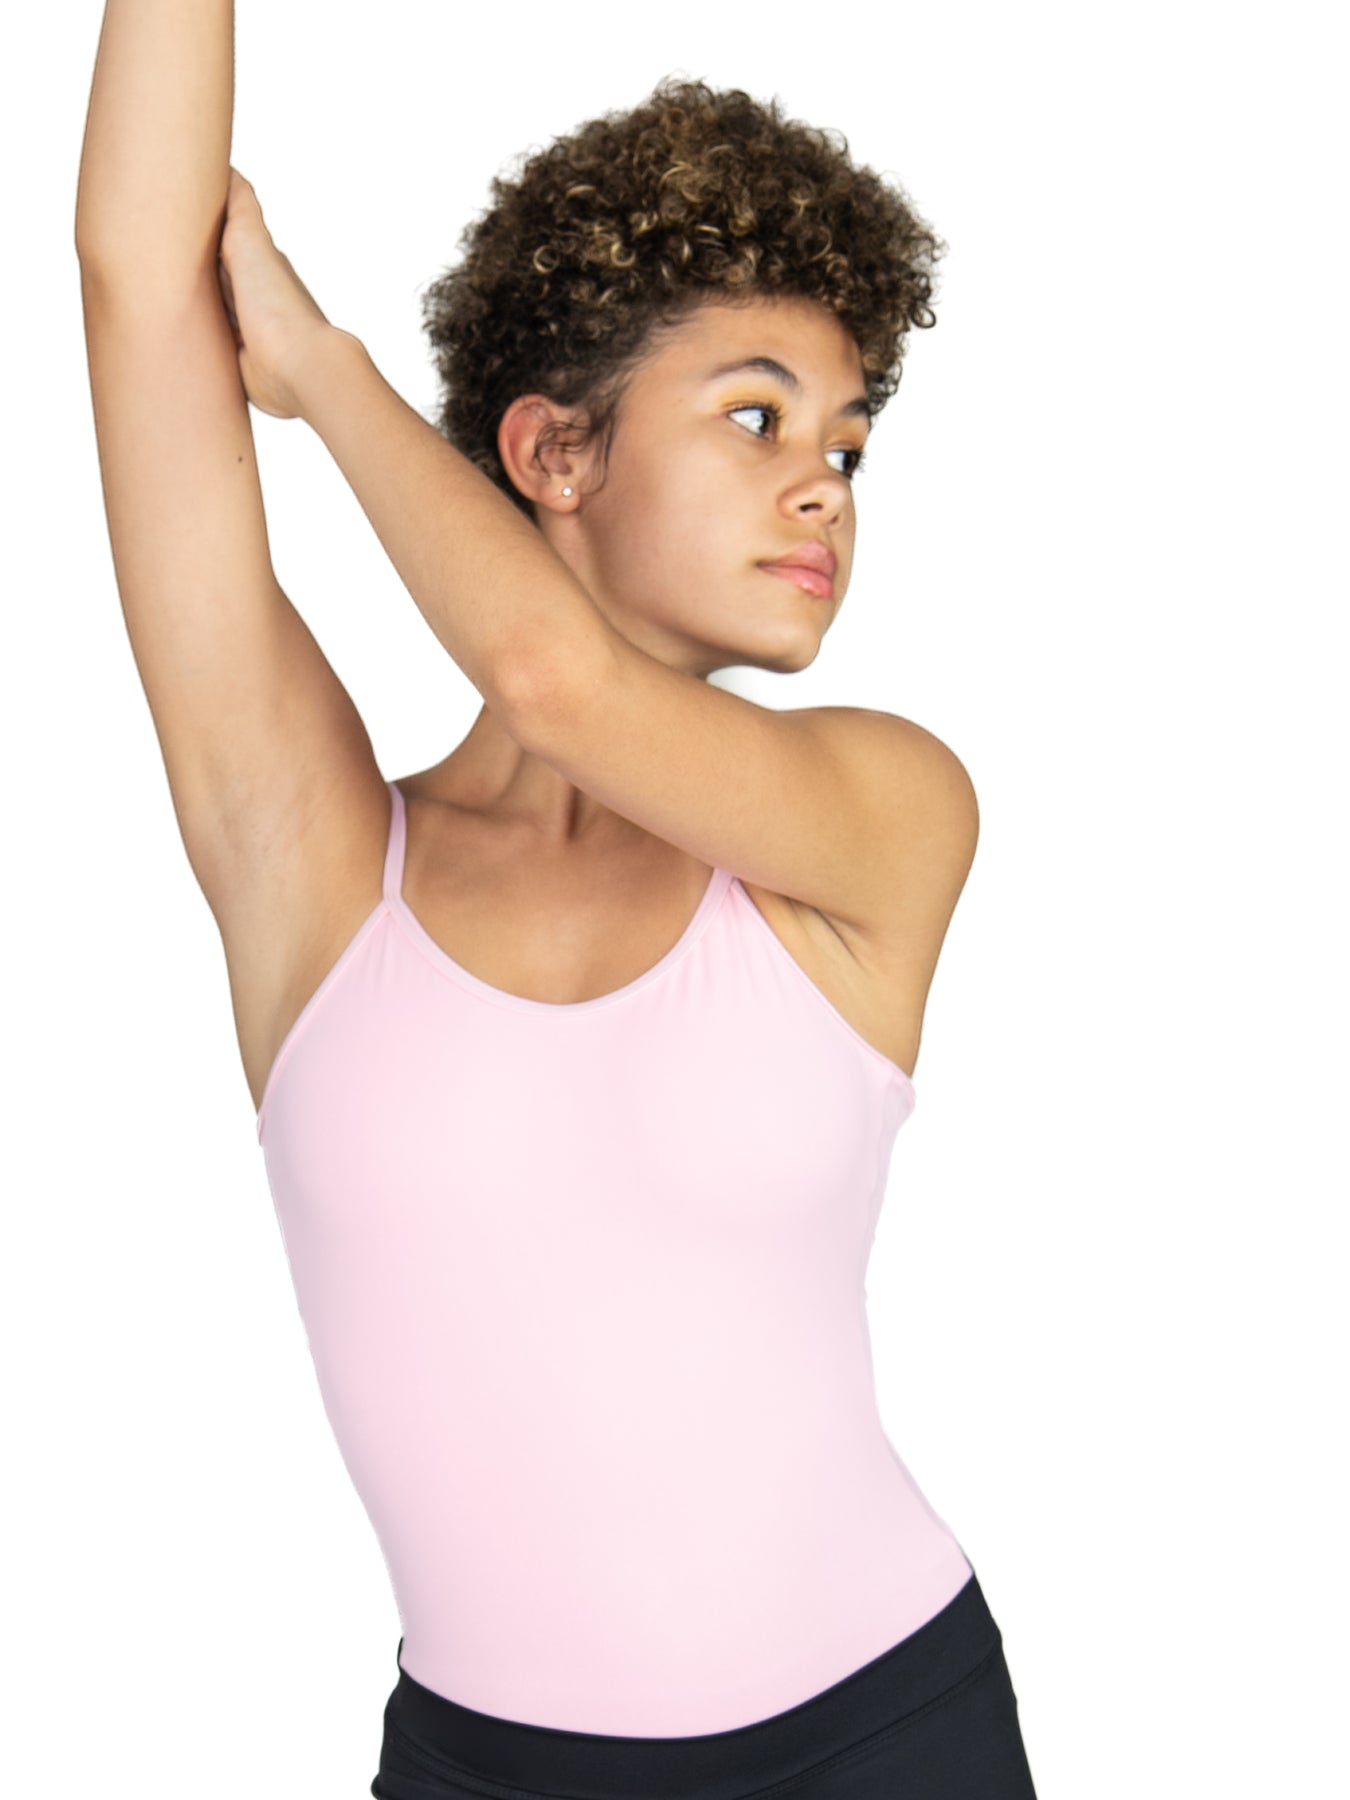 Body Wrappers Camisole Ballet Cut Leotard : BWP224 - Just For Kix